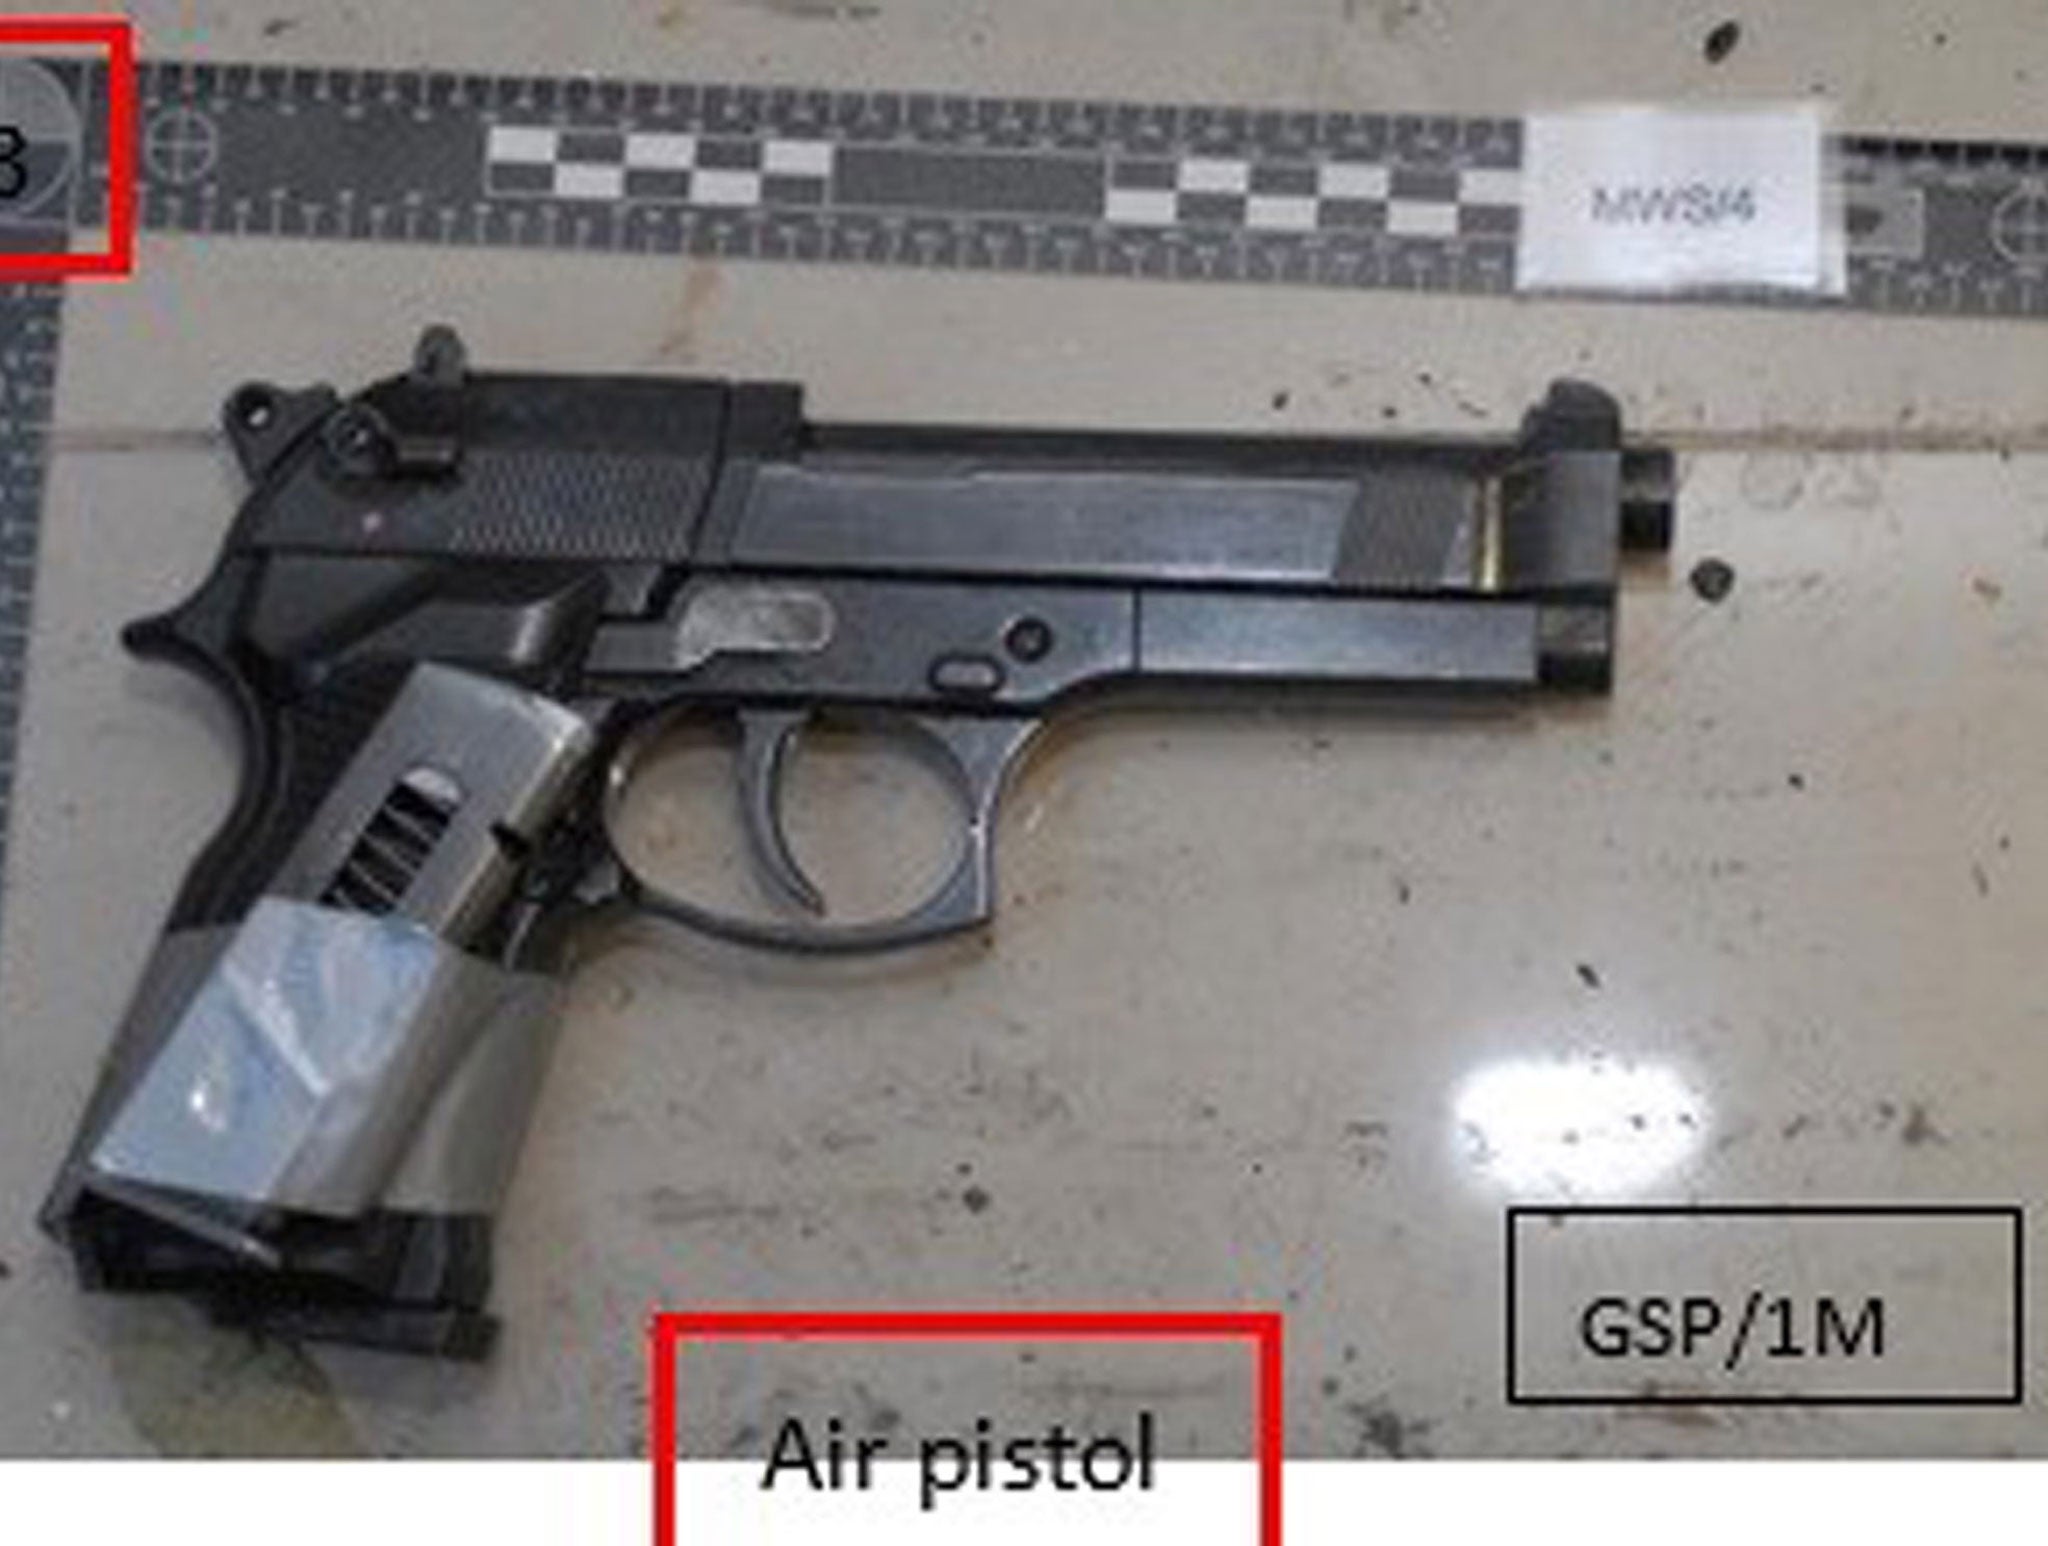 An imitation handgun with an empty magazine strapped to it that was found stashed in Naweed Ali’s Seat Leon car